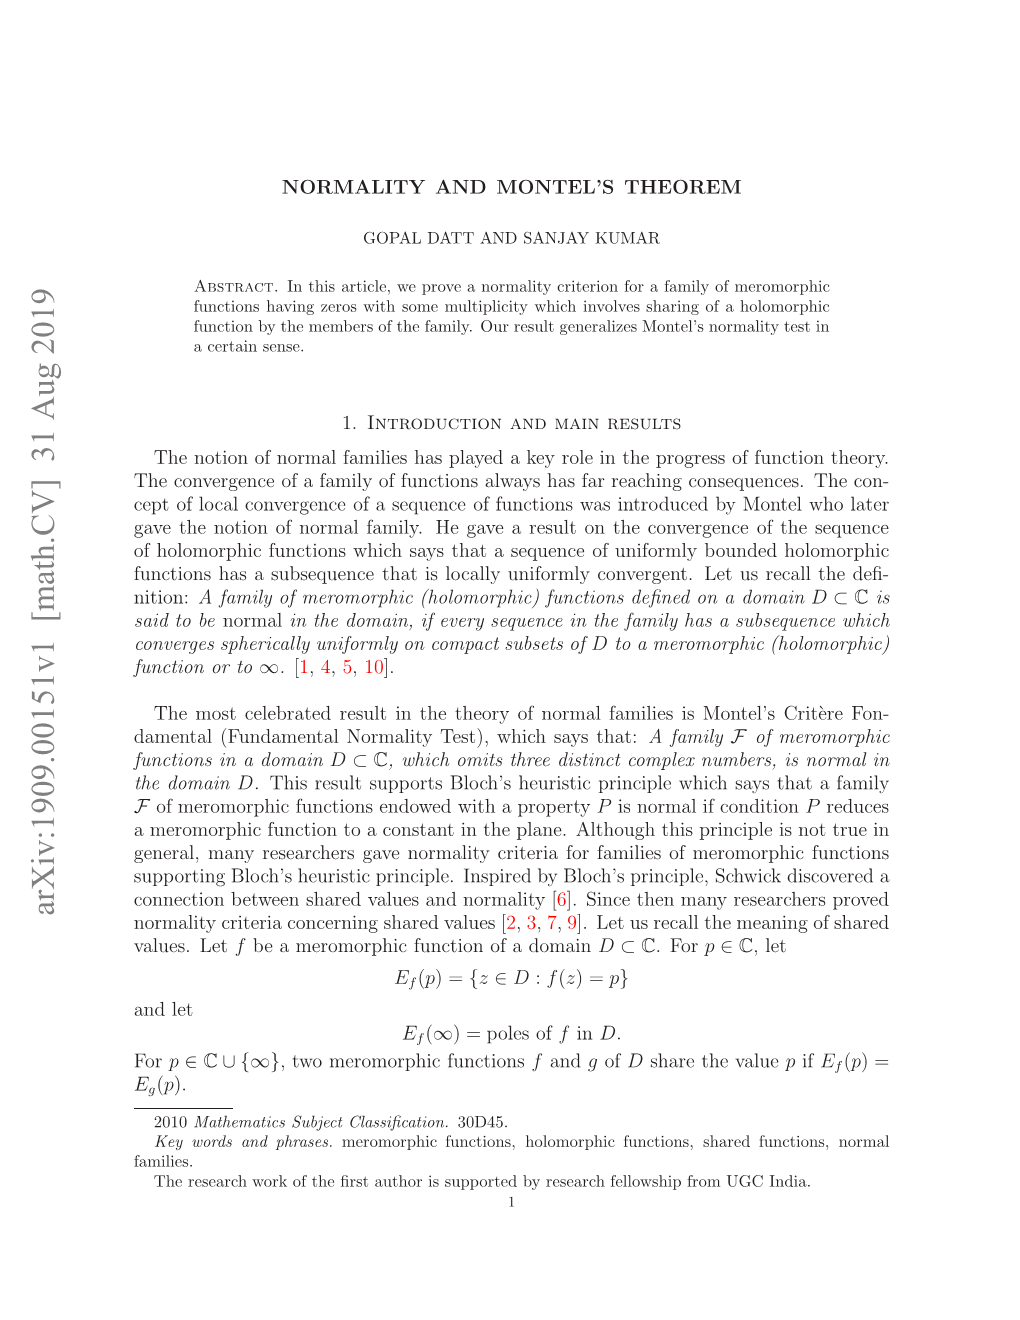 Arxiv:1909.00151V1 [Math.CV] 31 Aug 2019 N Let and for Adt Be to Said E Ucin a Usqec Hti Oal Nfrl Ovret L Convergent